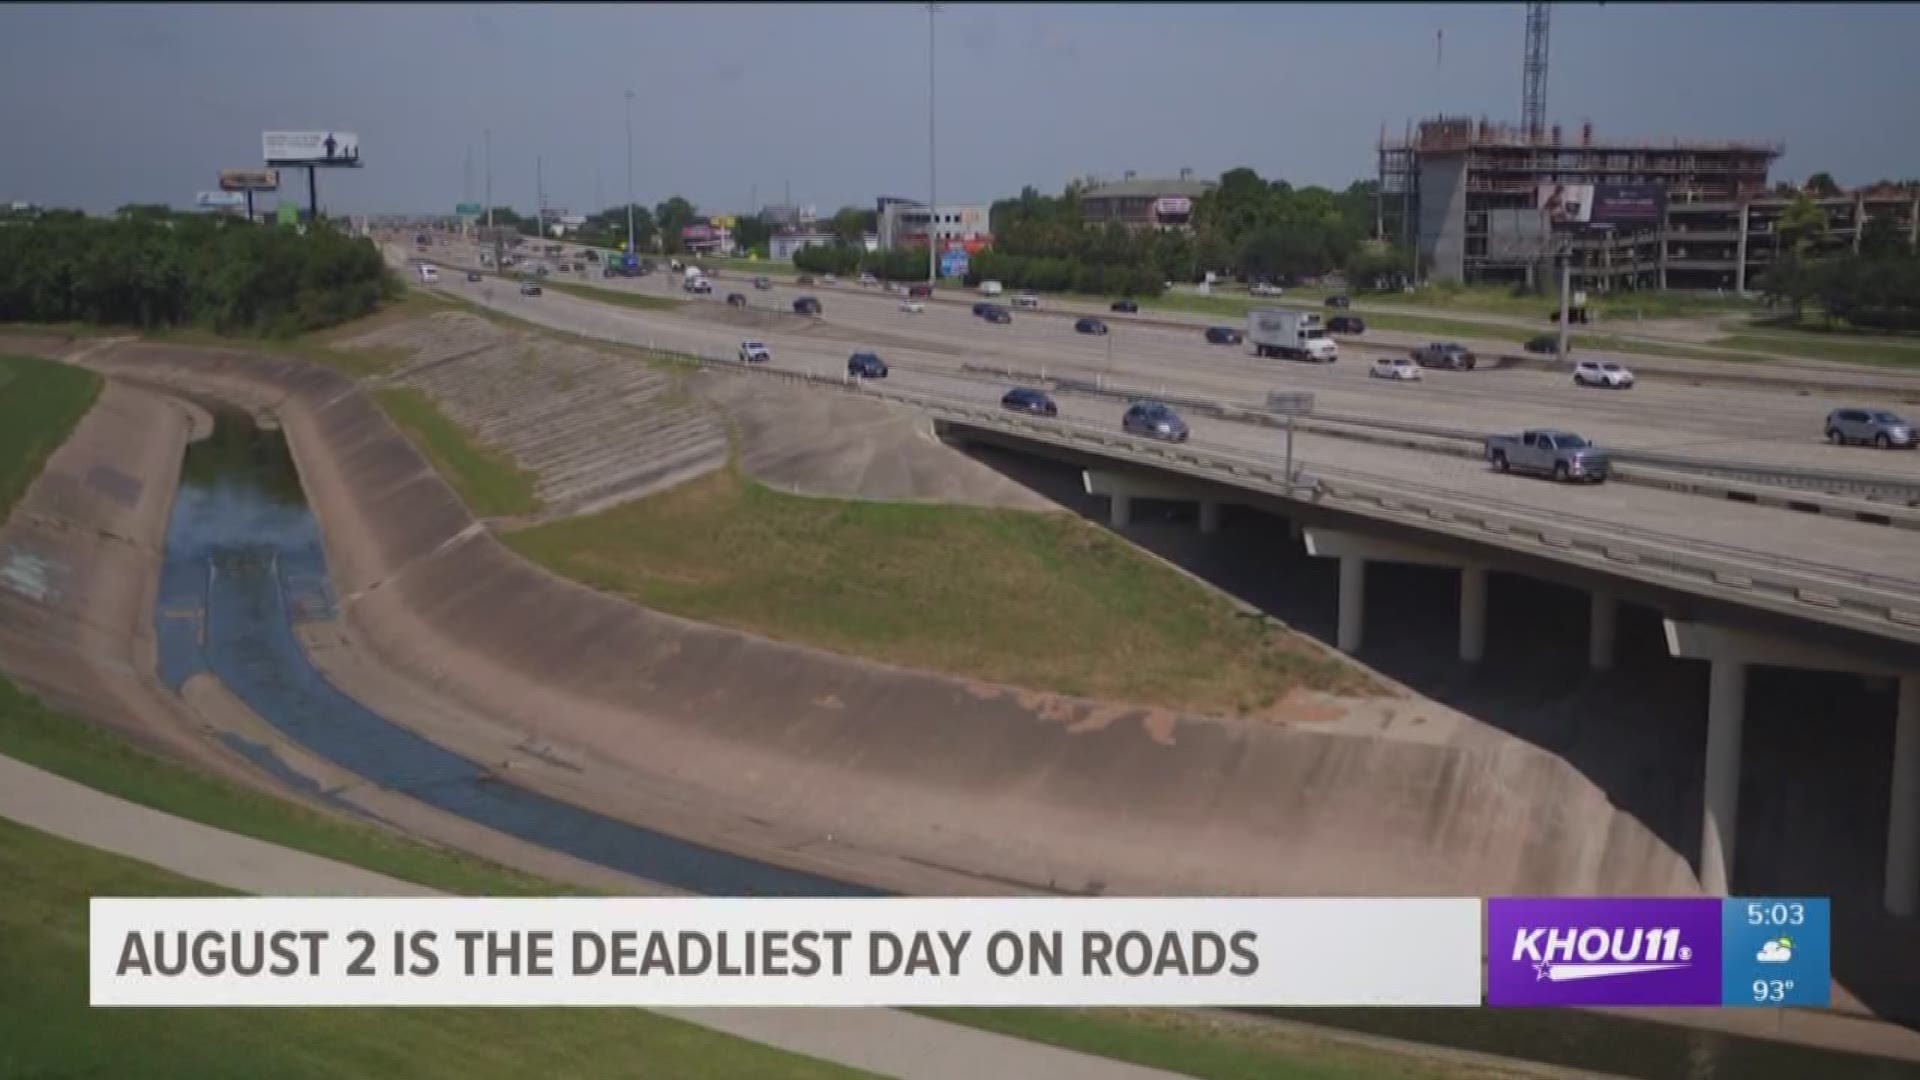 Driving on Houston highways can be a nightmare. But some are deadlier than others.